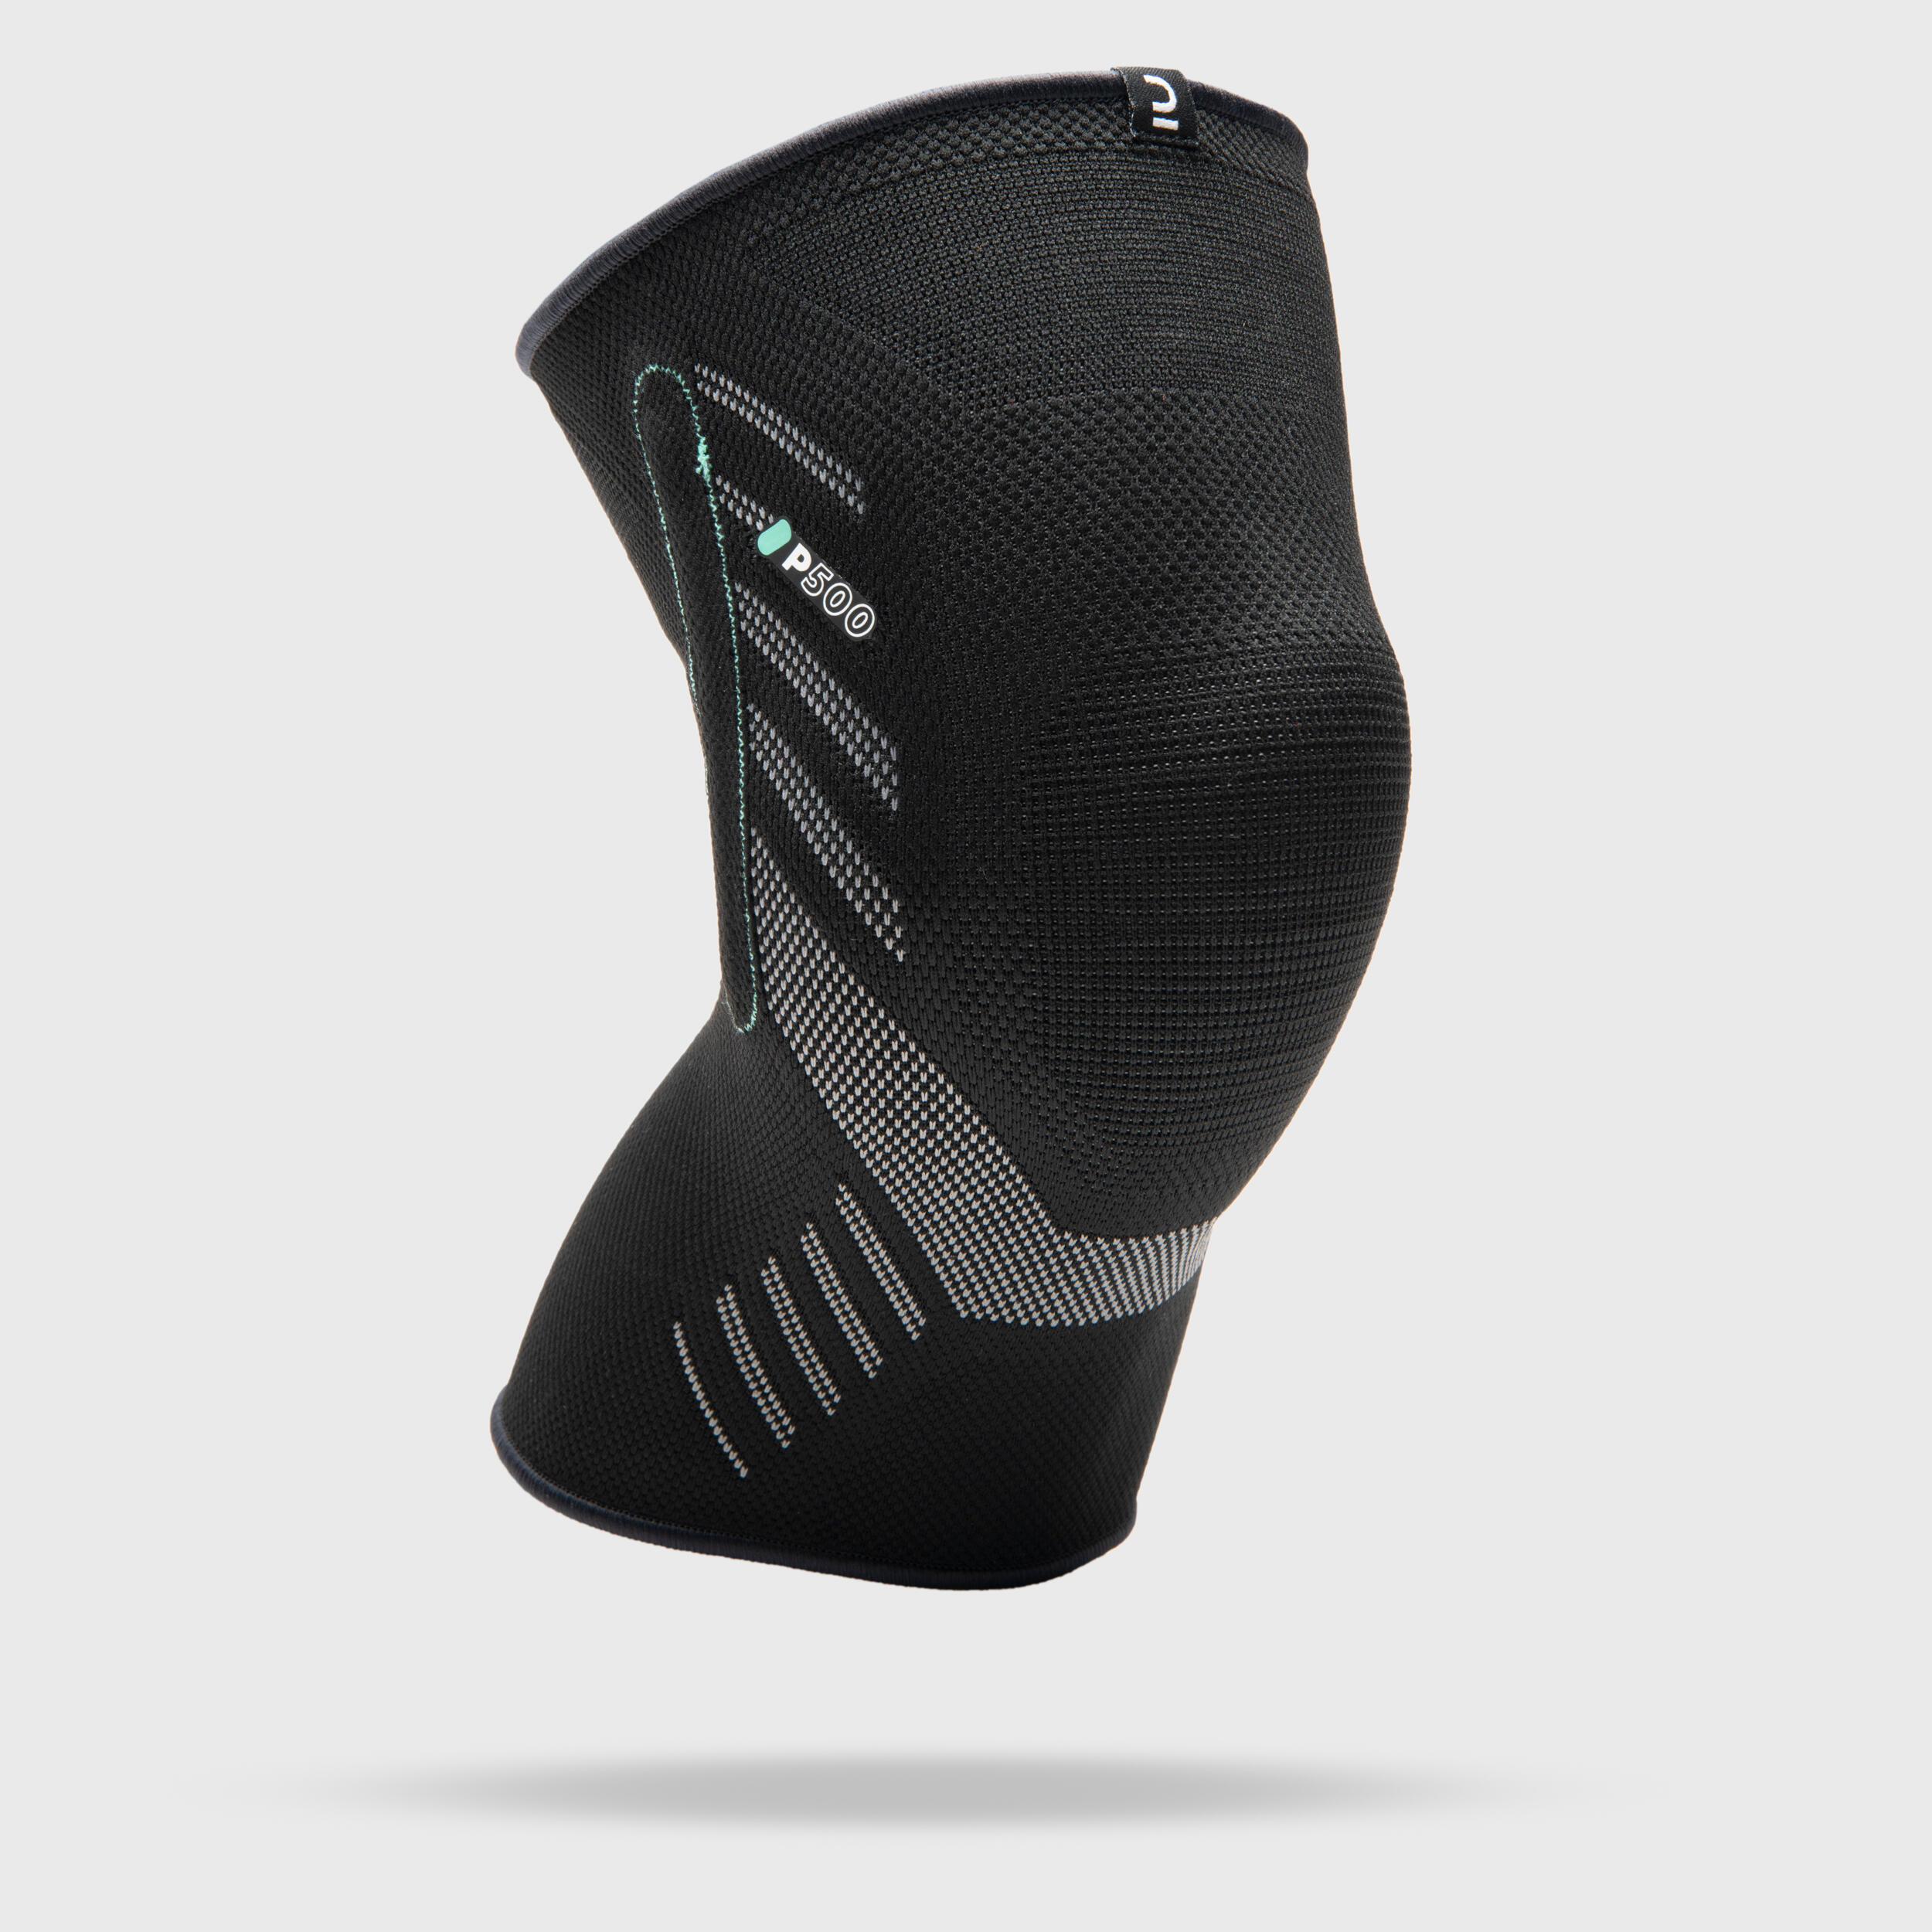 CEP Mid Support Knee Sleeve for women and men